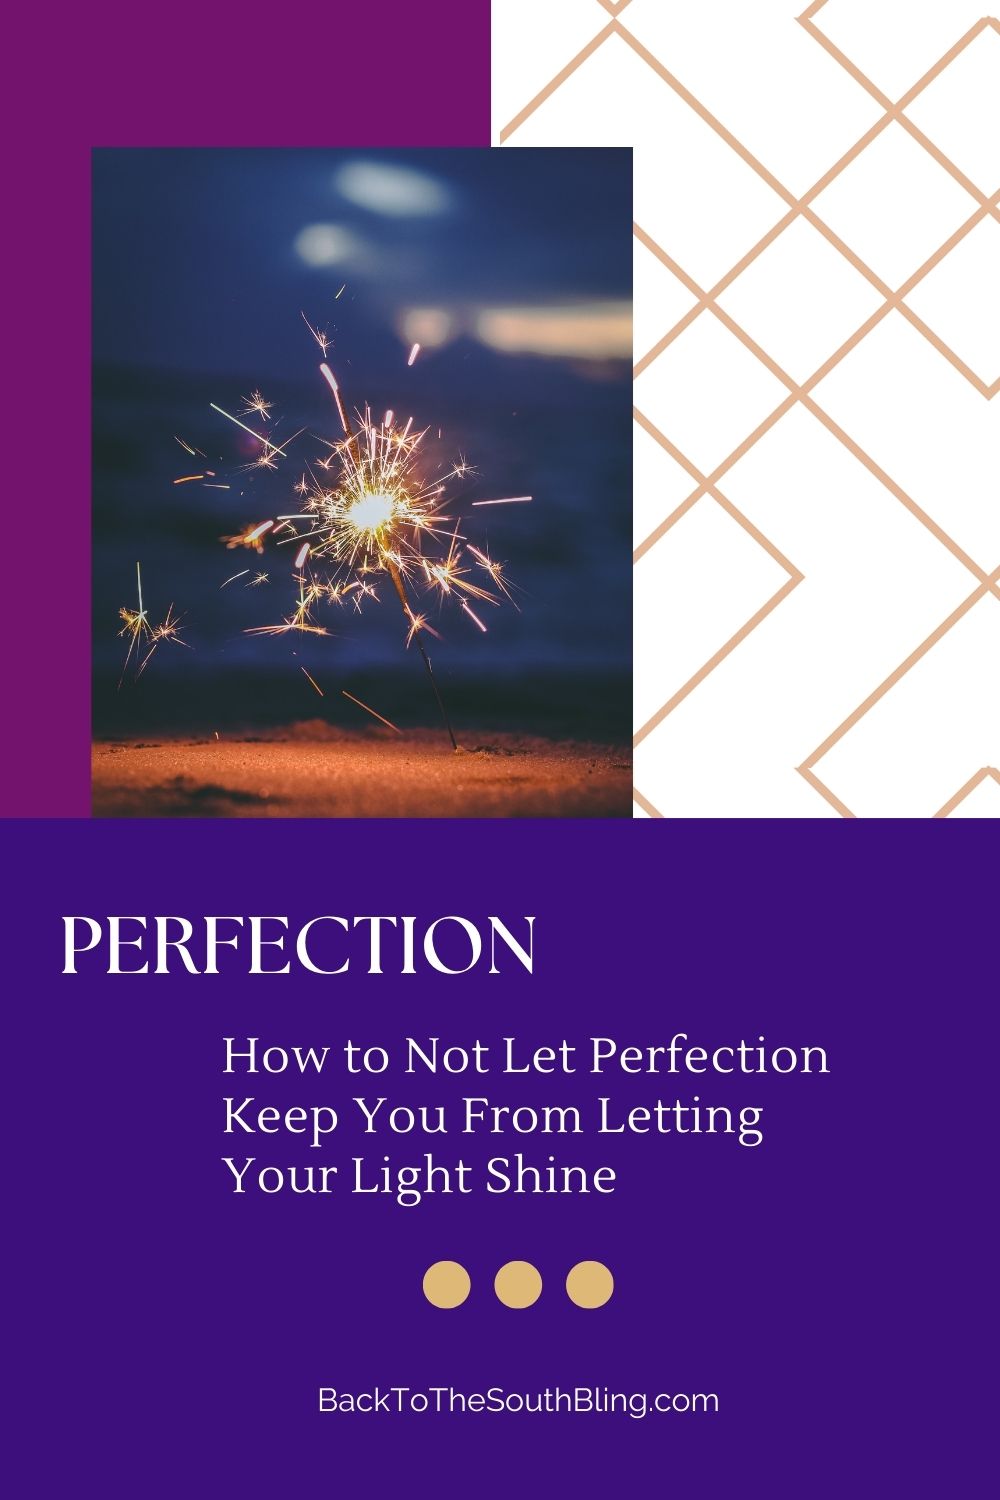 How to Not Let Perfection Keep You From Letting Your Light Shine